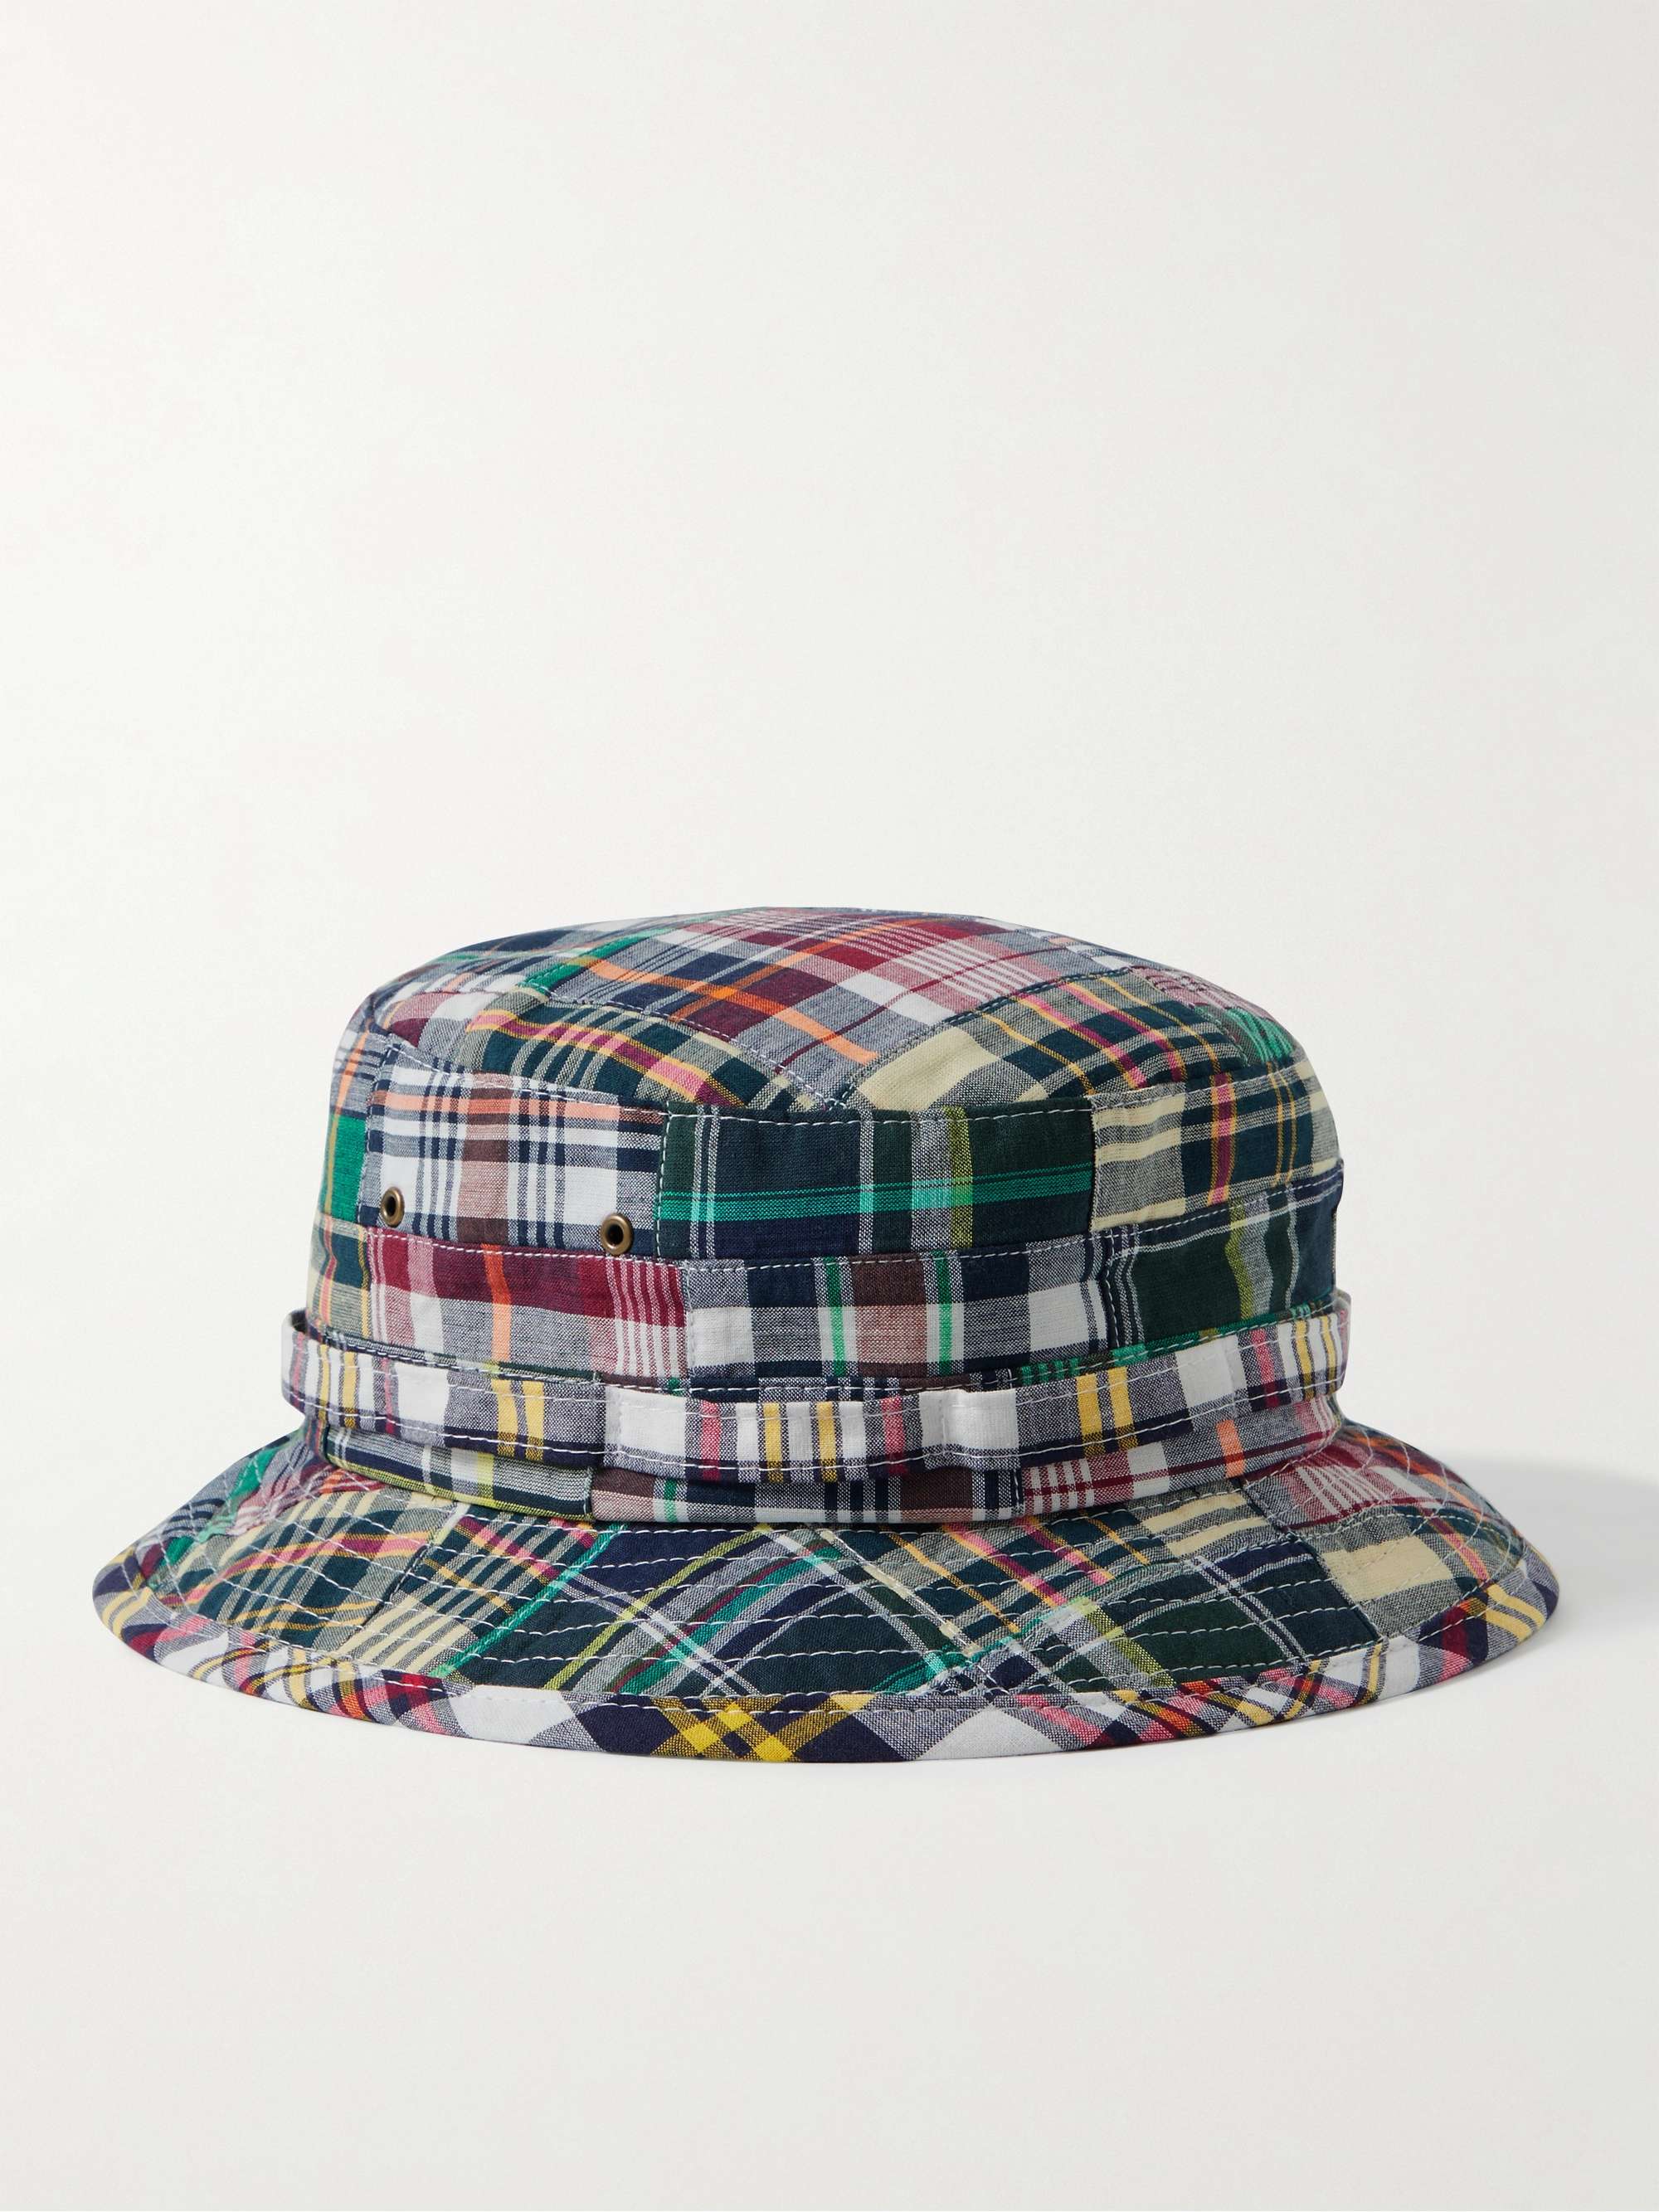 BEAMS PLUS + Throwing Fits Patchwork Checked Cotton Bucket Hat